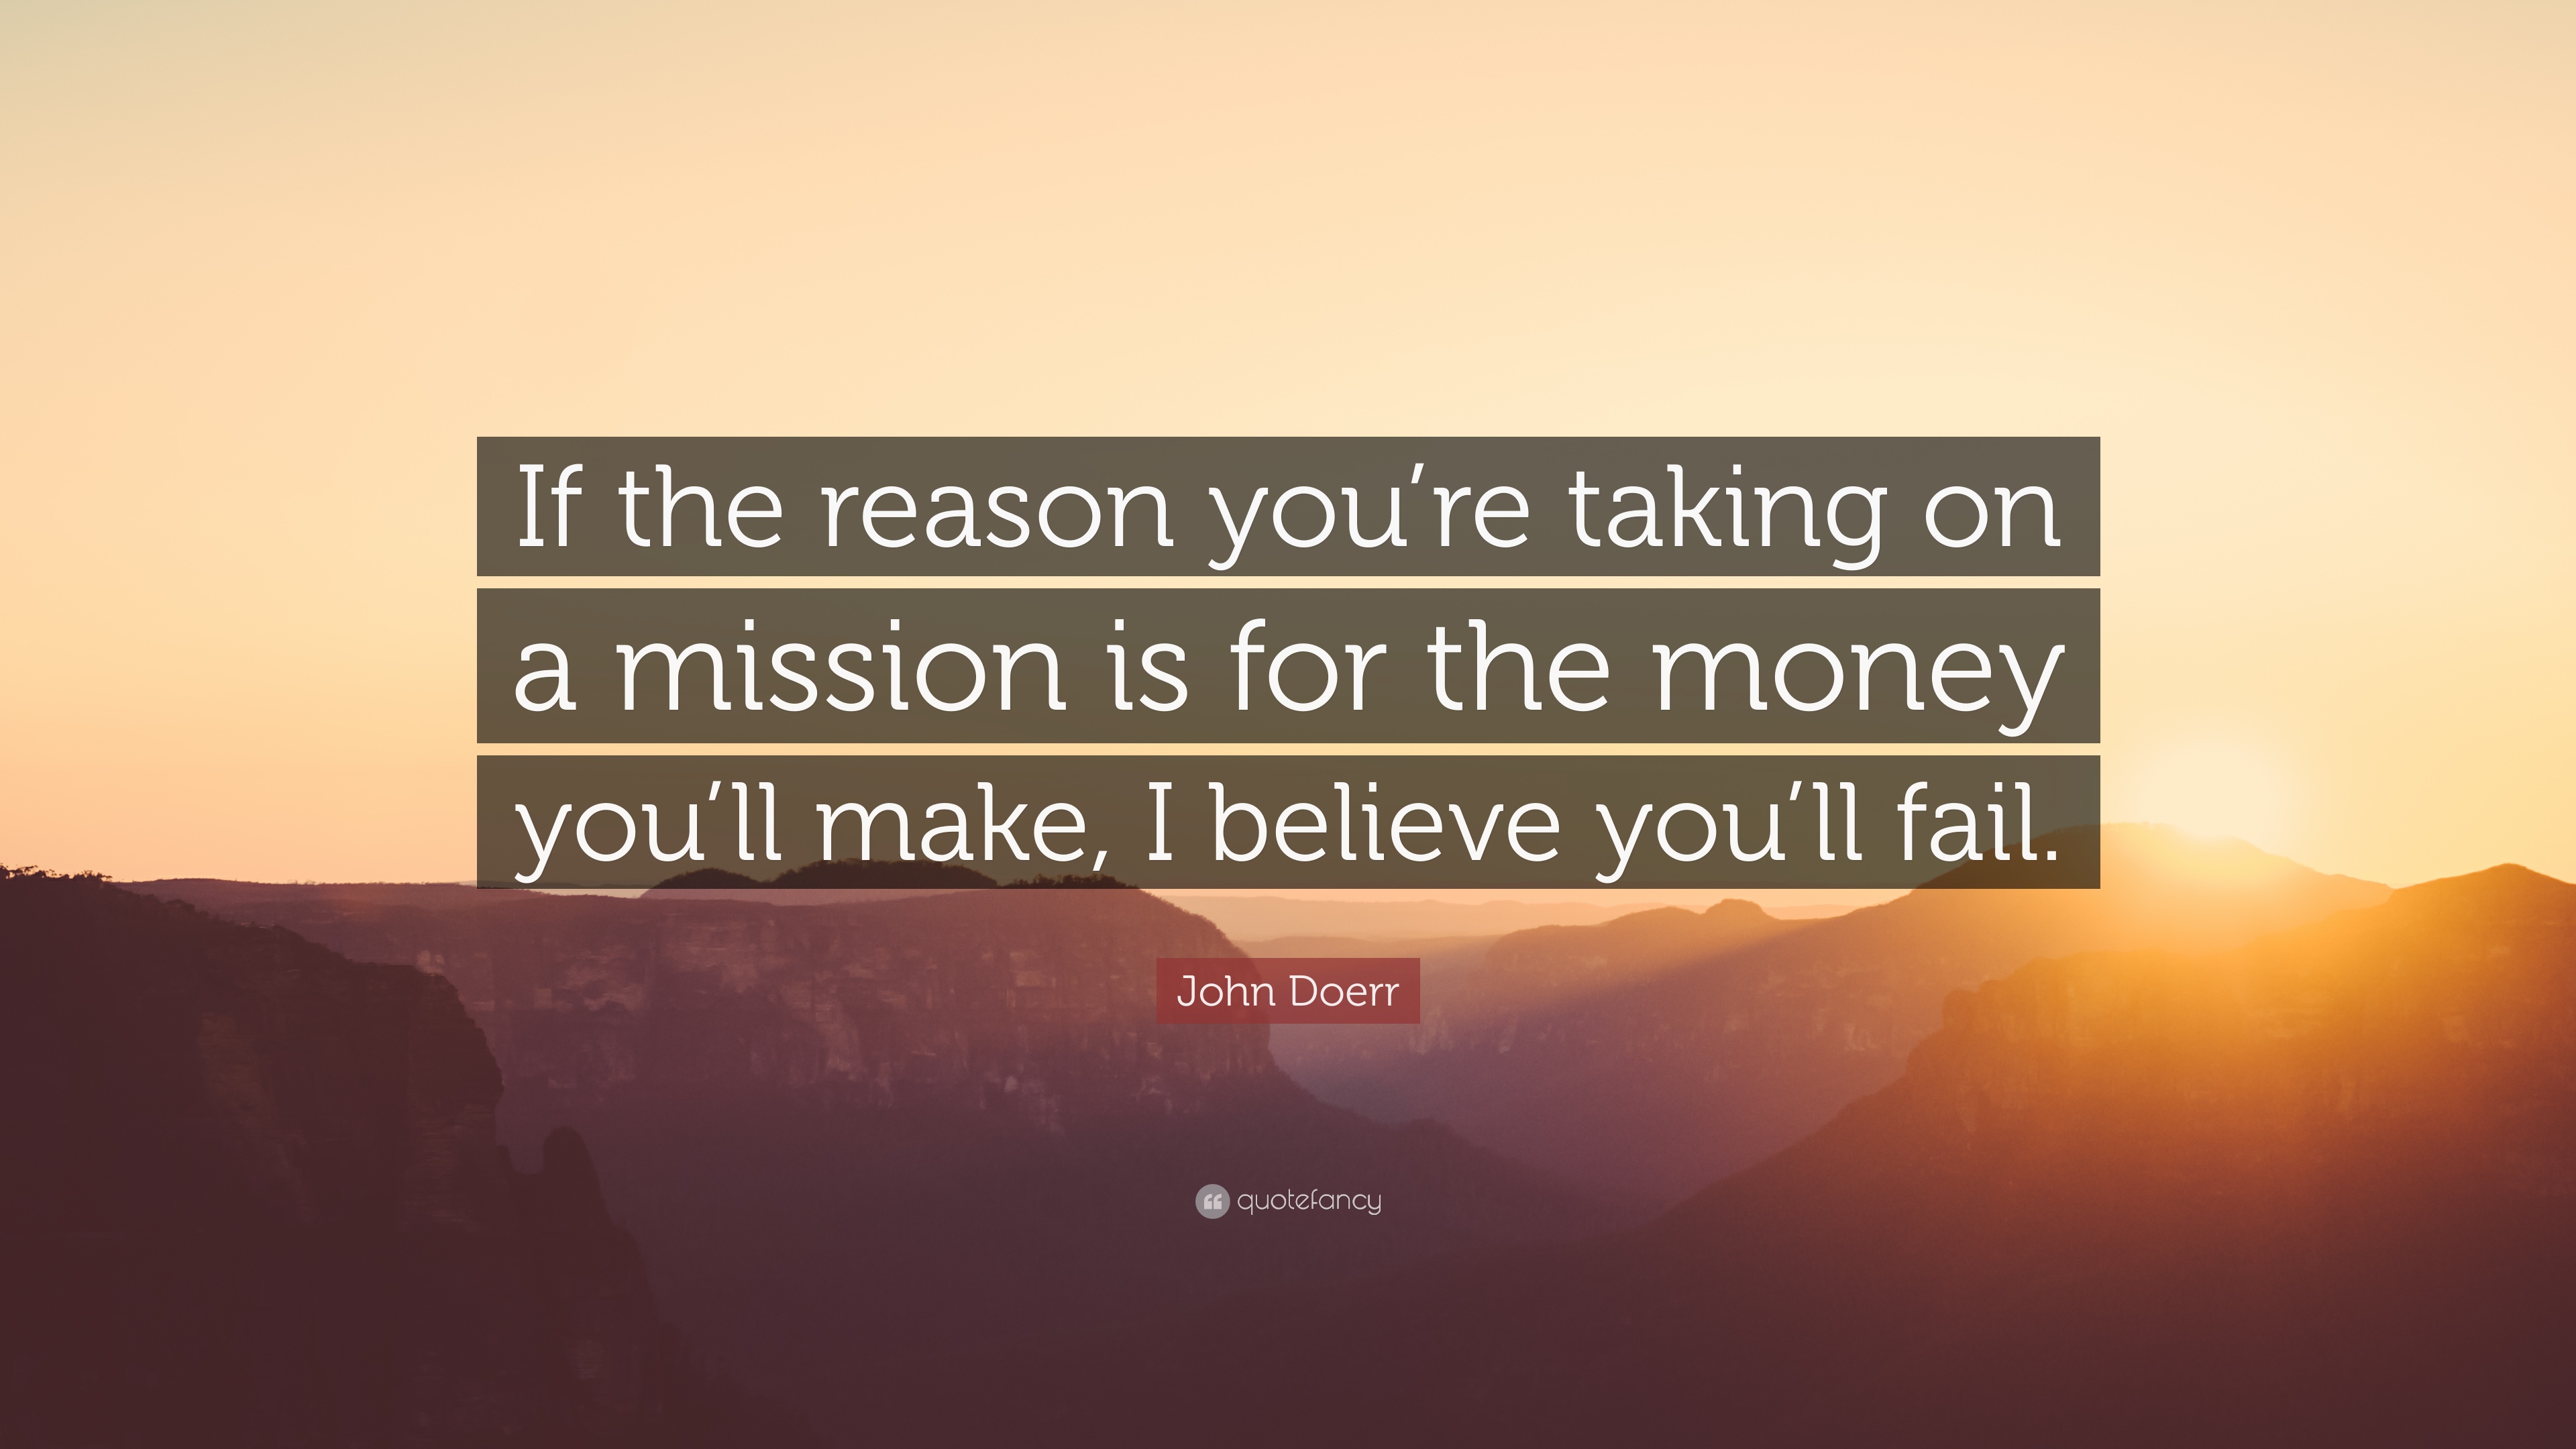 John Doerr Quote: “If the reason you're taking on a mission is for ...